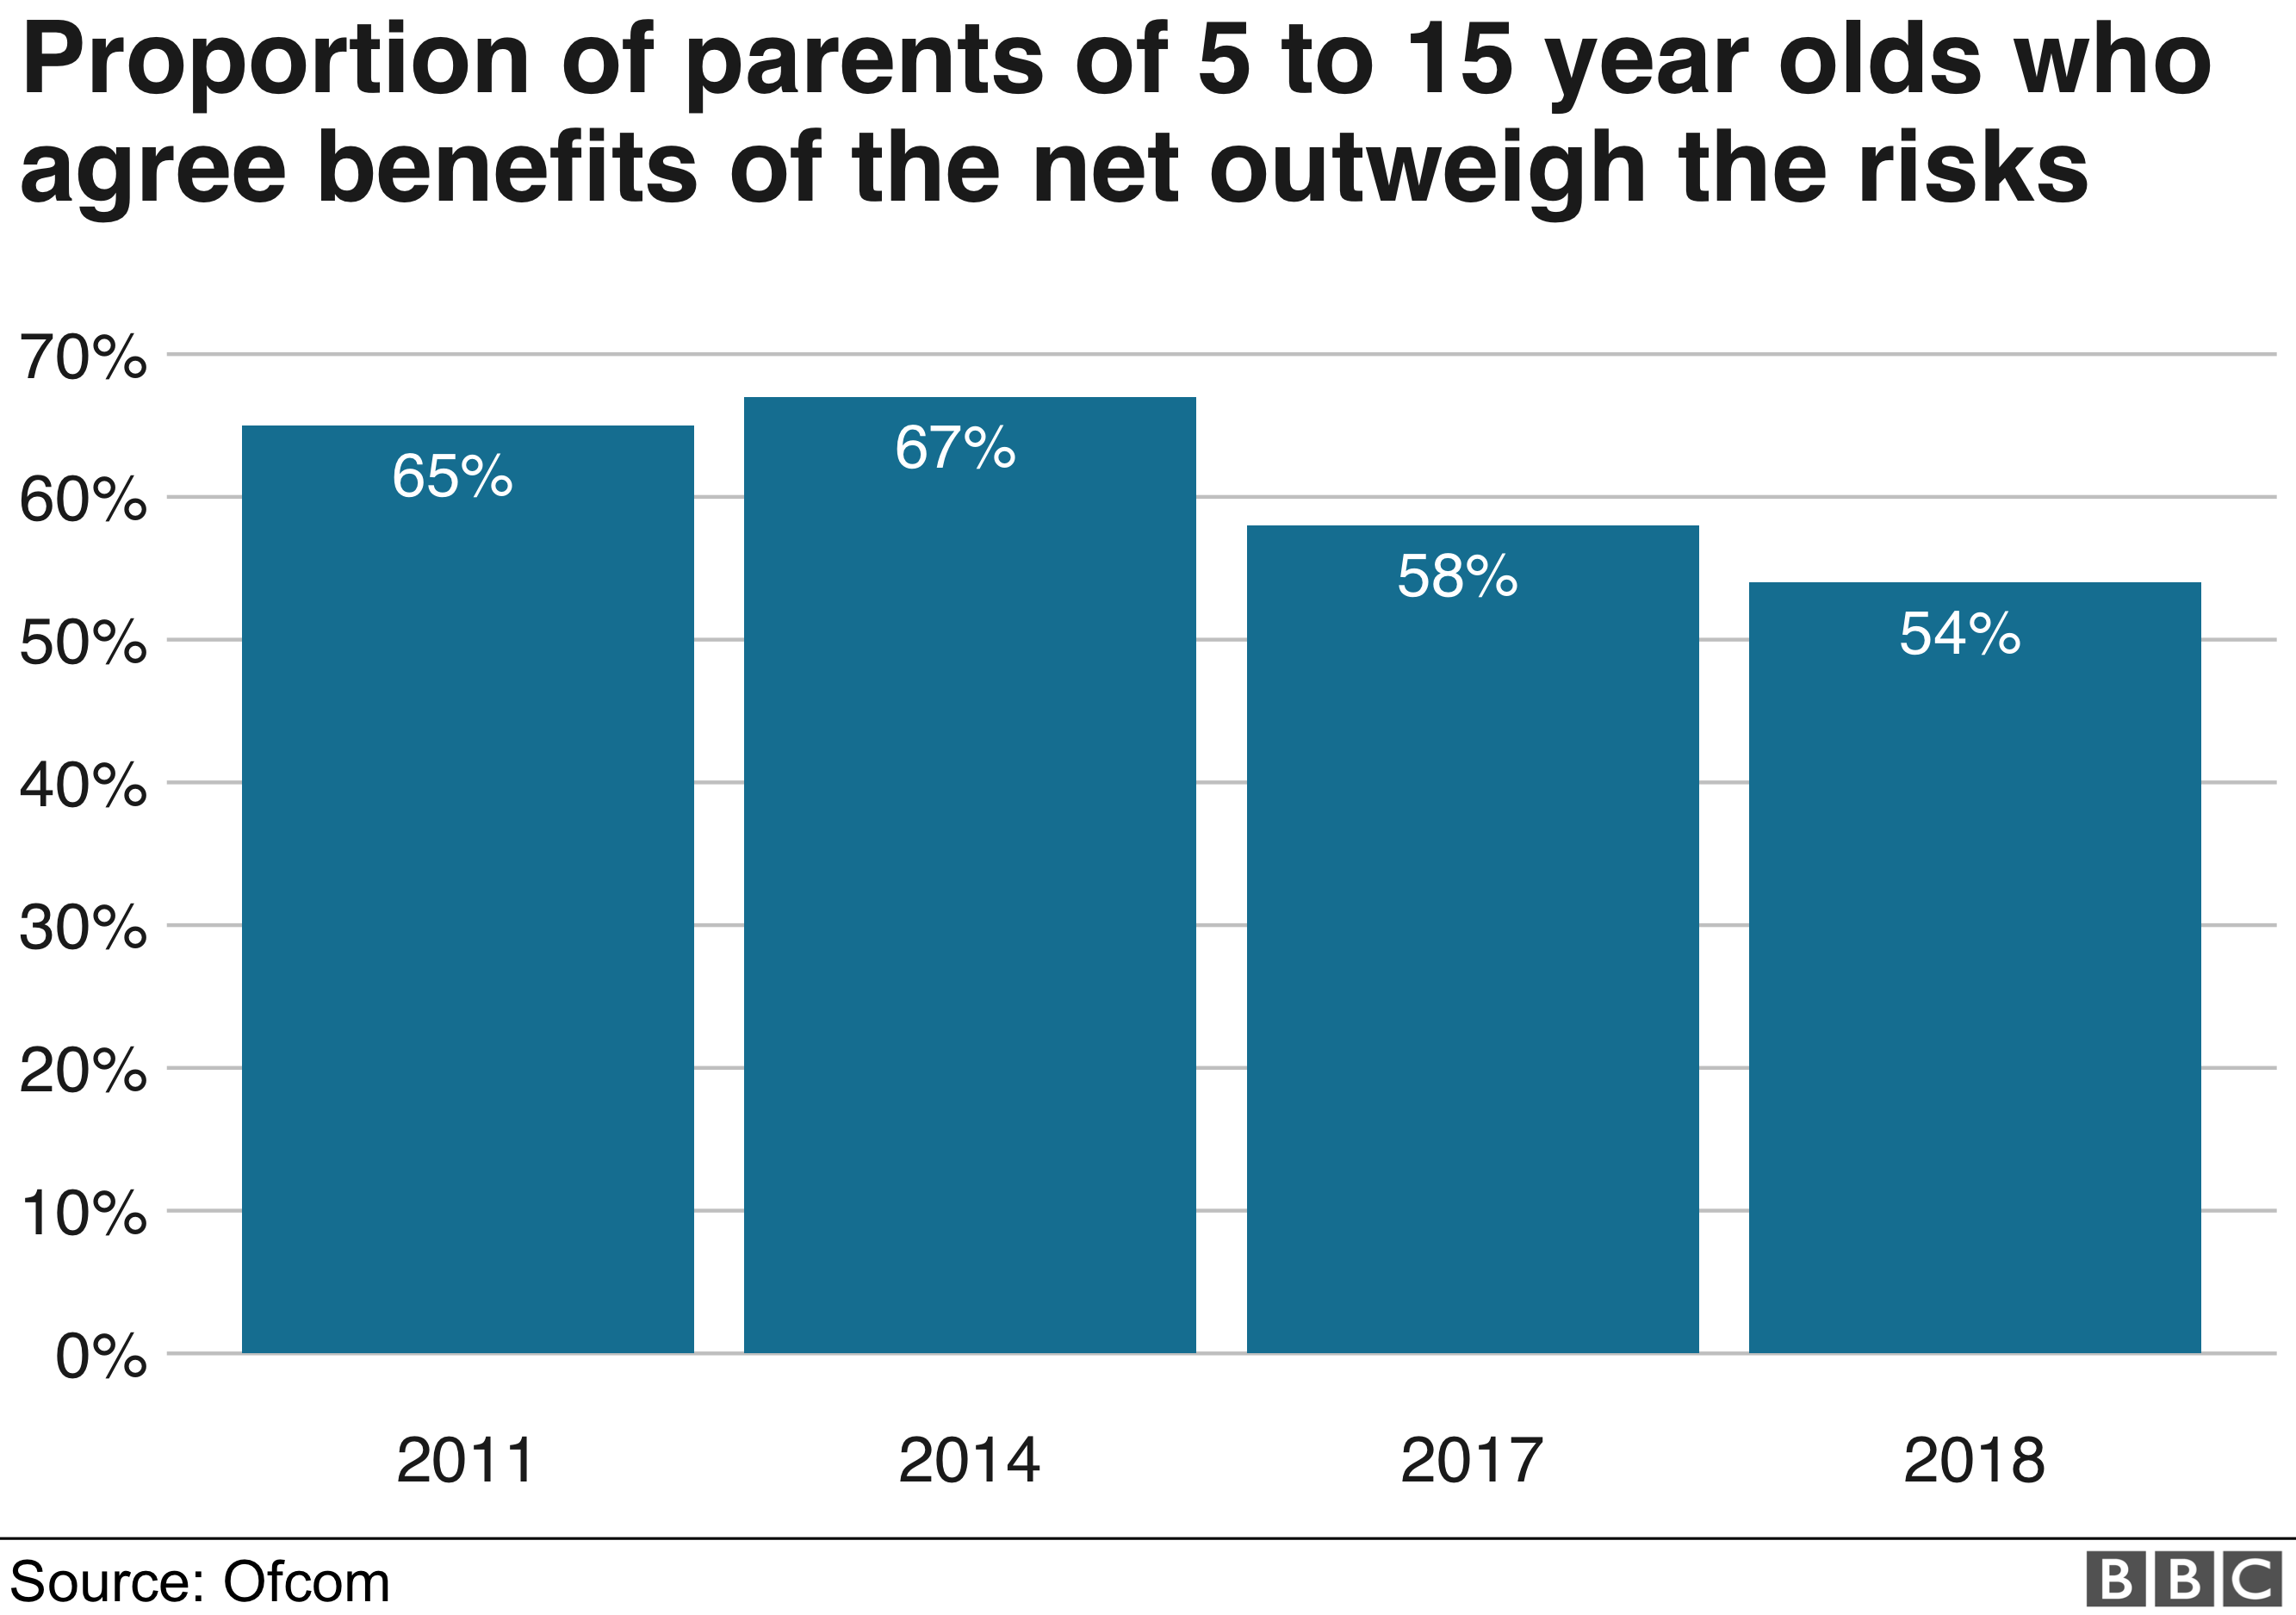 Ofcom chart showing that 54% of parents think benefits of the internet outweigh the risks